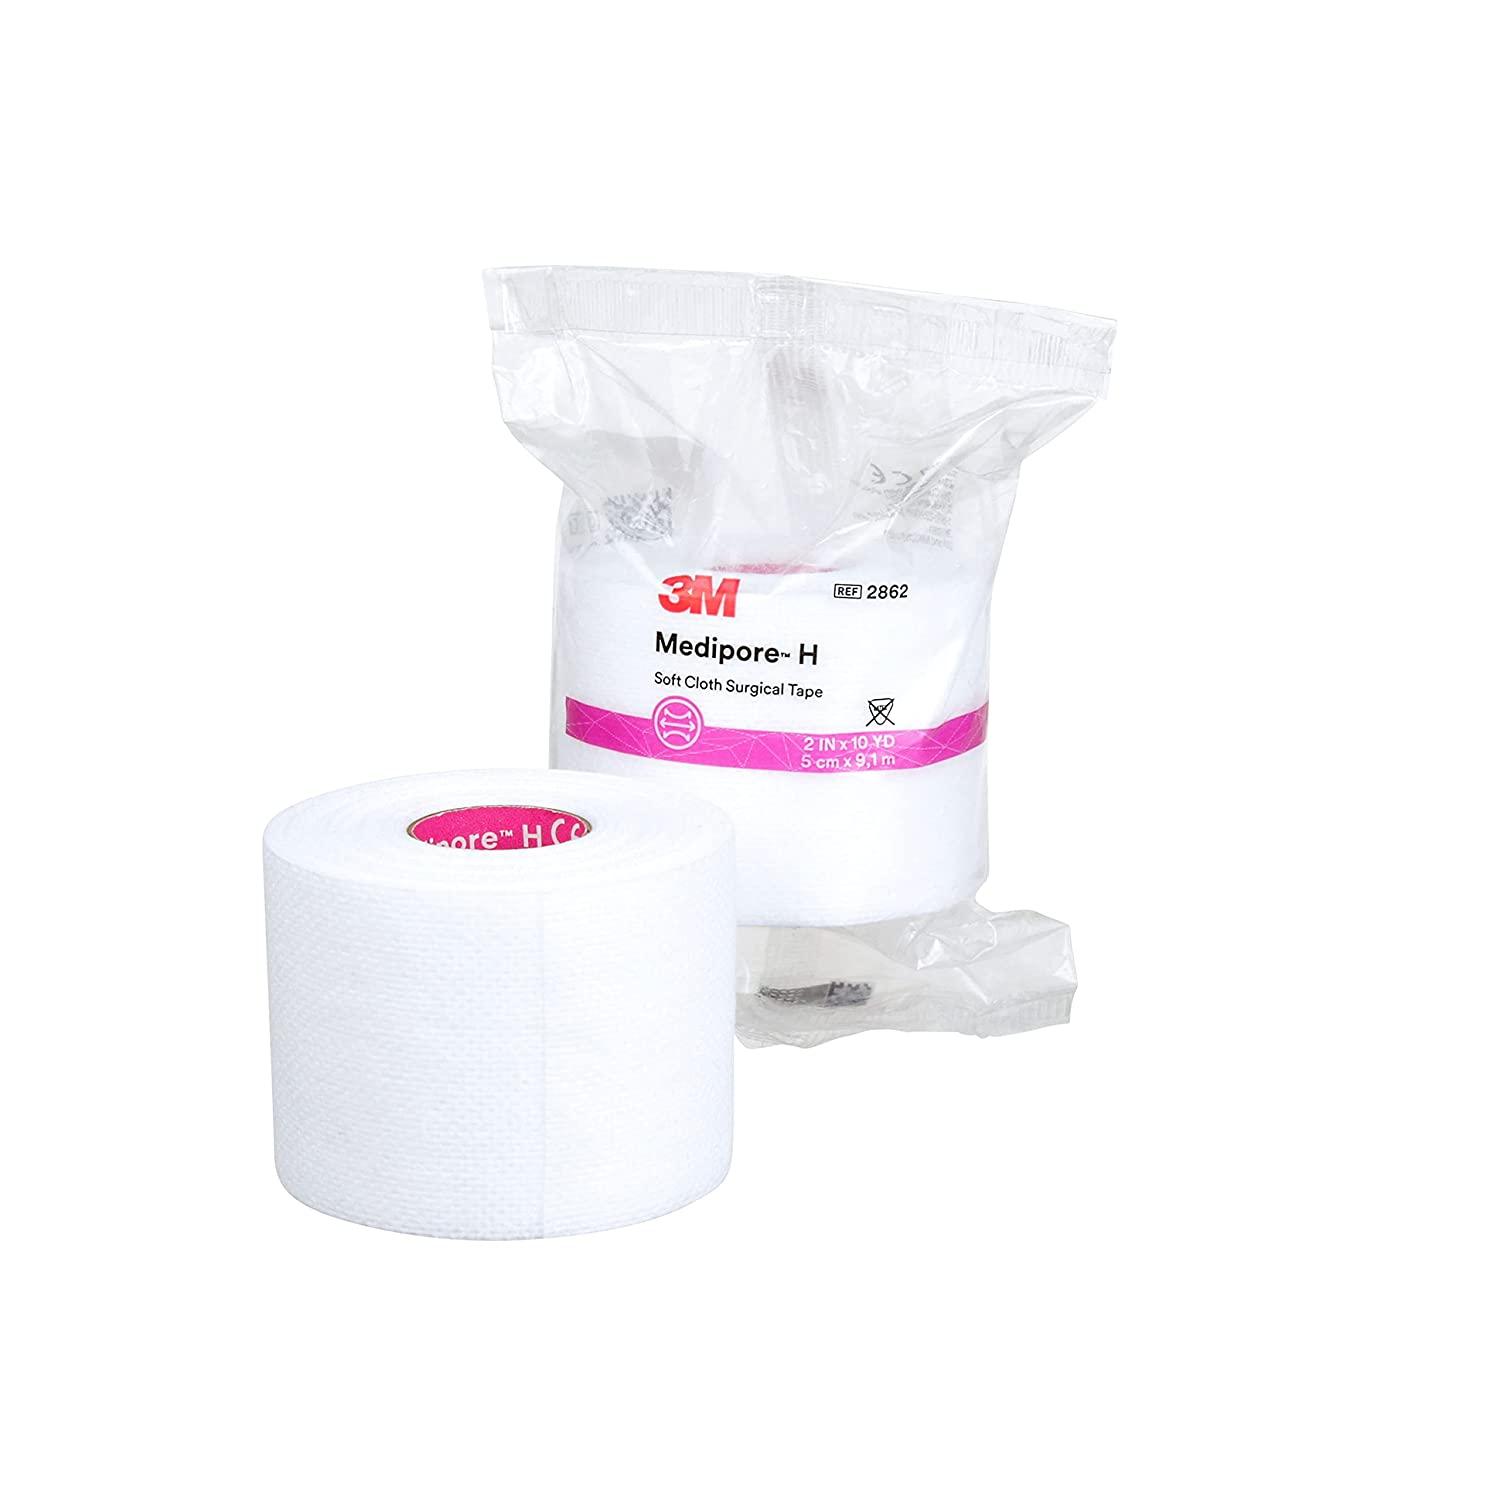 3M Medipore Soft Cloth Surgical Tape (2 in x 10 yd)